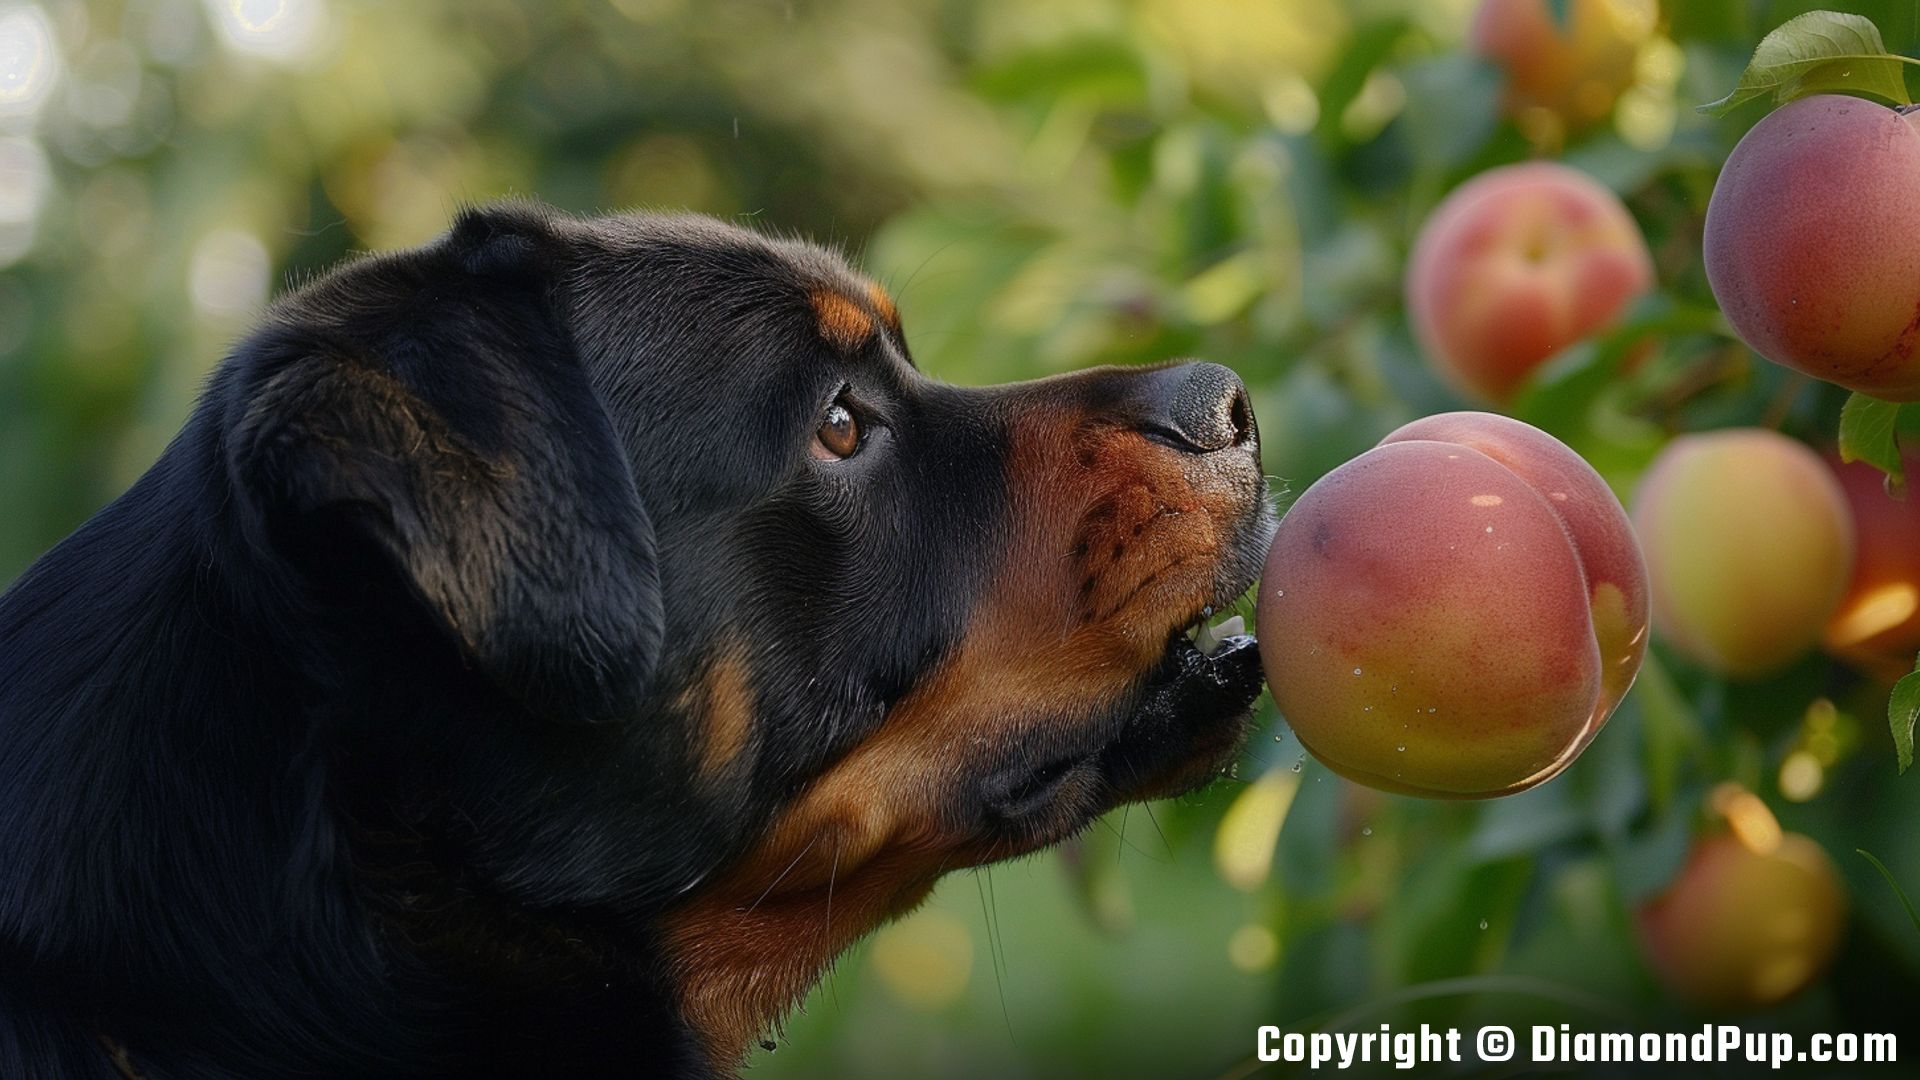 Image of Rottweiler Snacking on Peaches